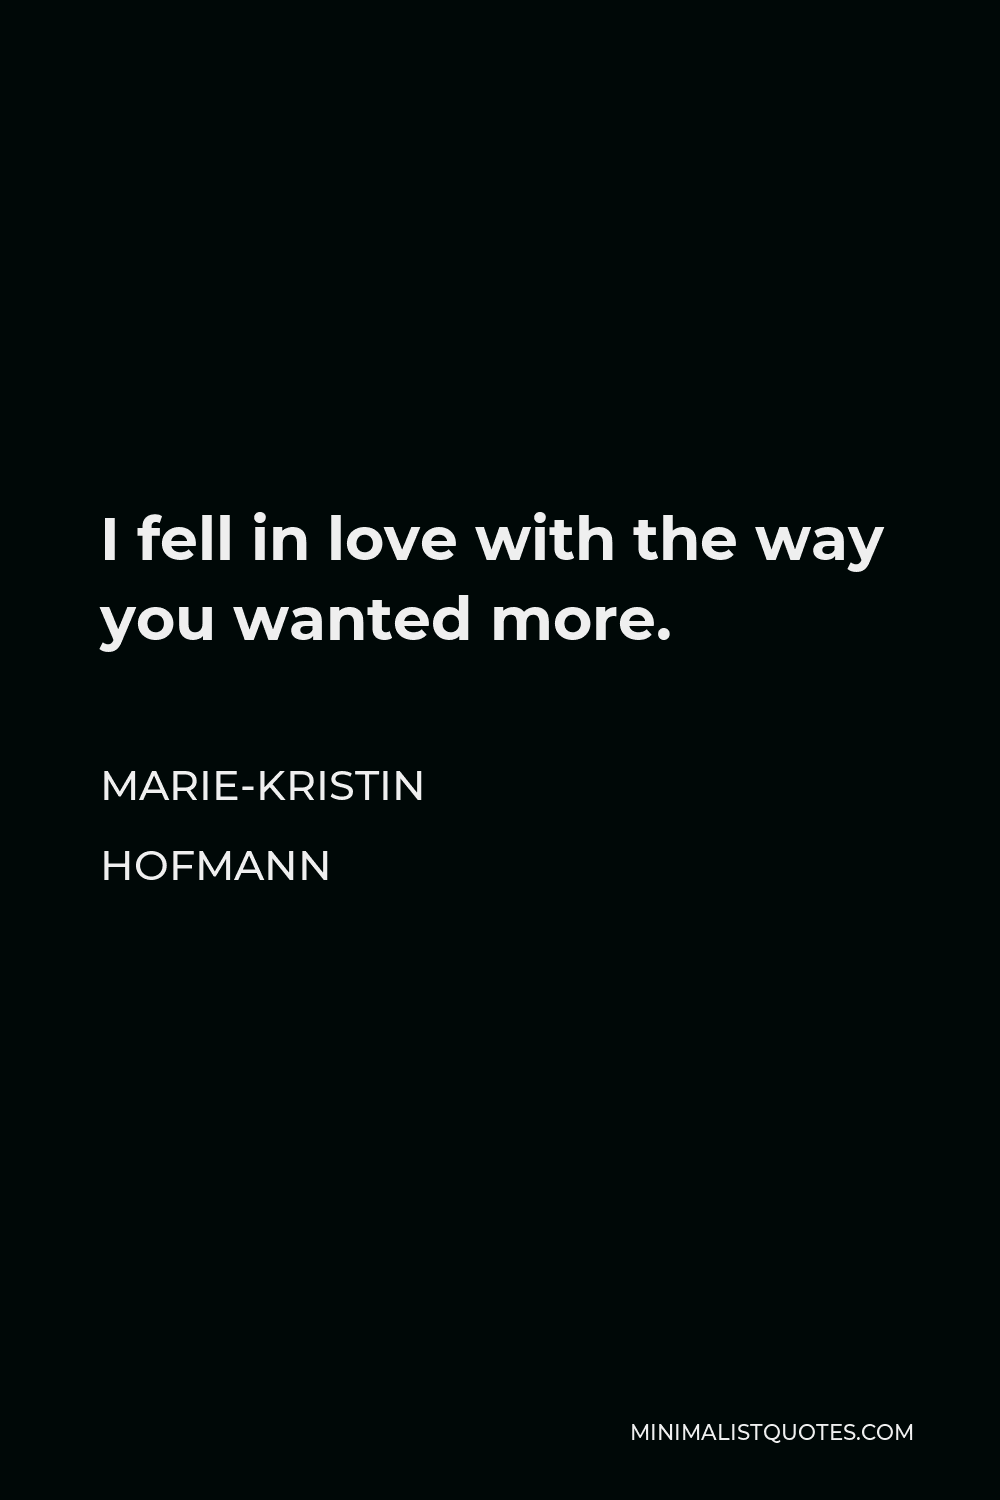 Marie-Kristin Hofmann Quote - I fell in love with the way you wanted more.